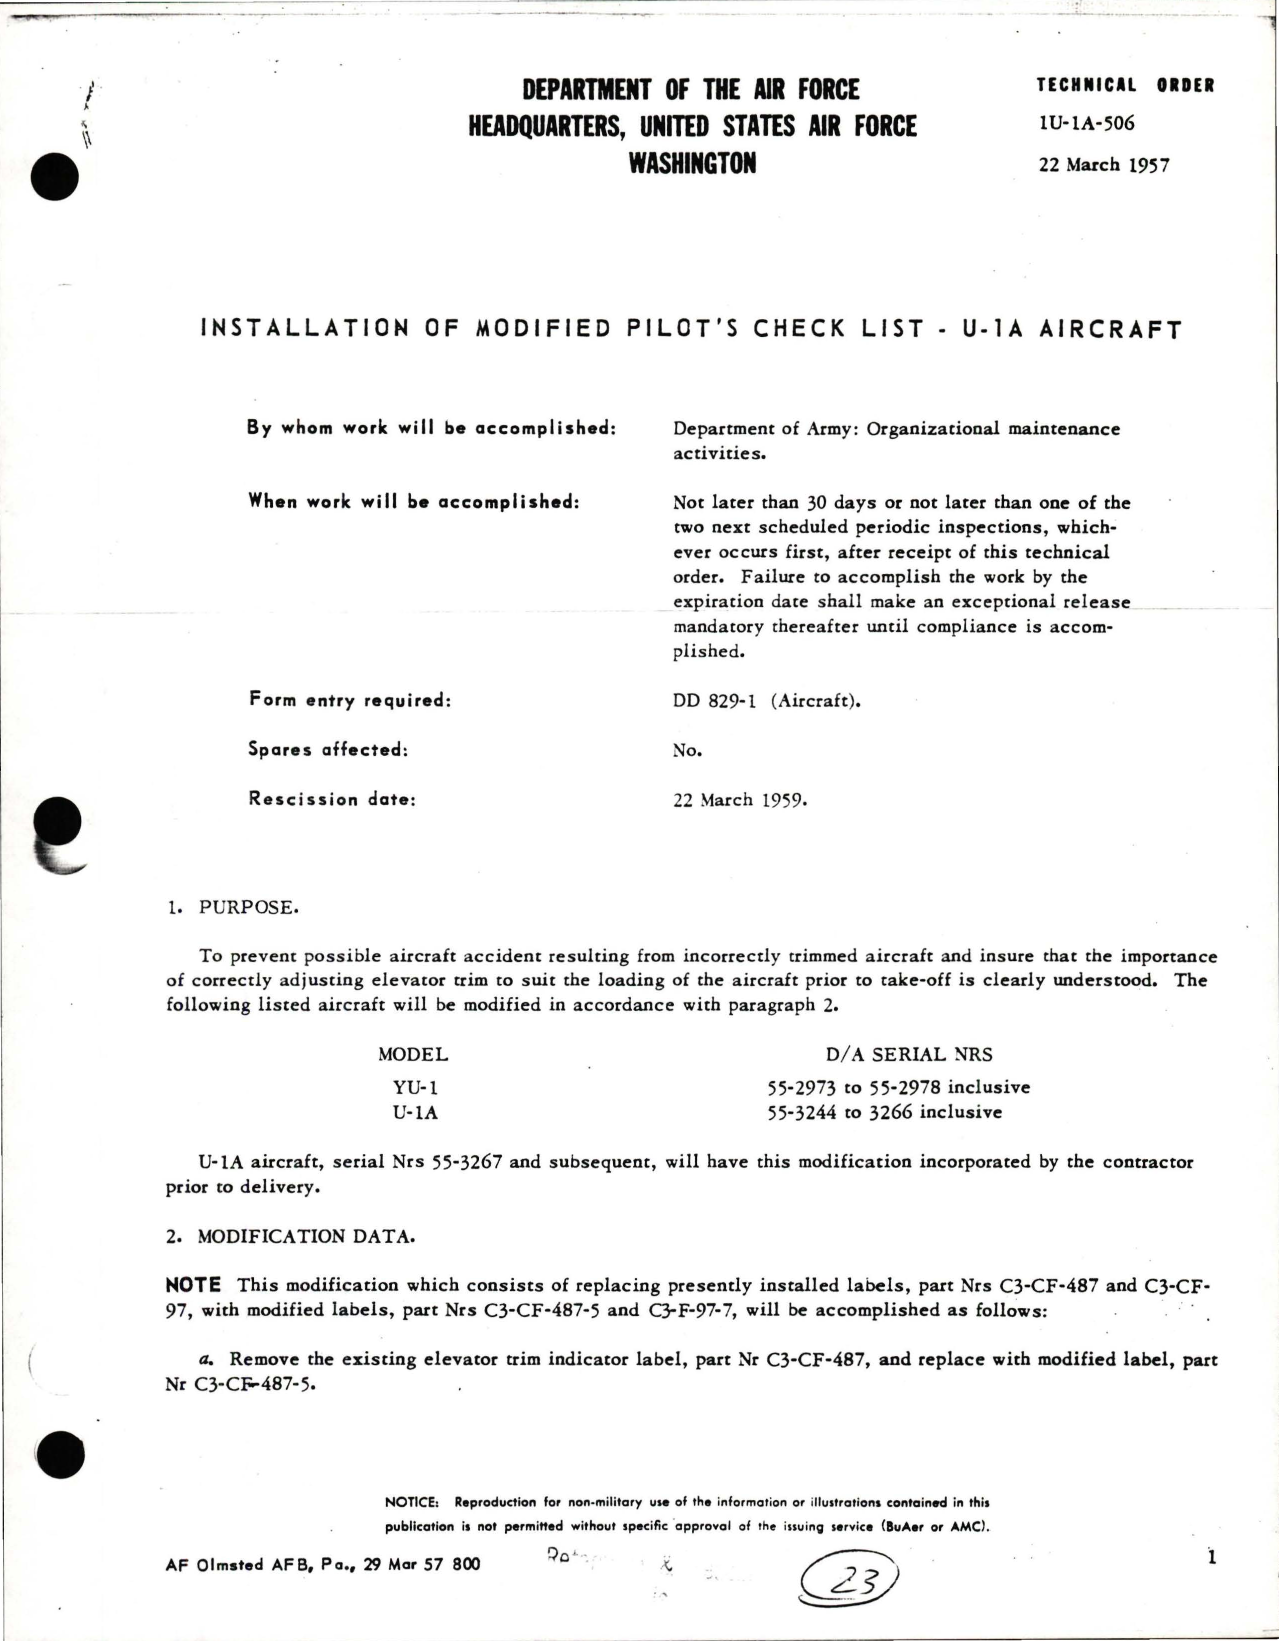 Sample page 1 from AirCorps Library document: Installation of Modified Pilot's Check List - U-1A